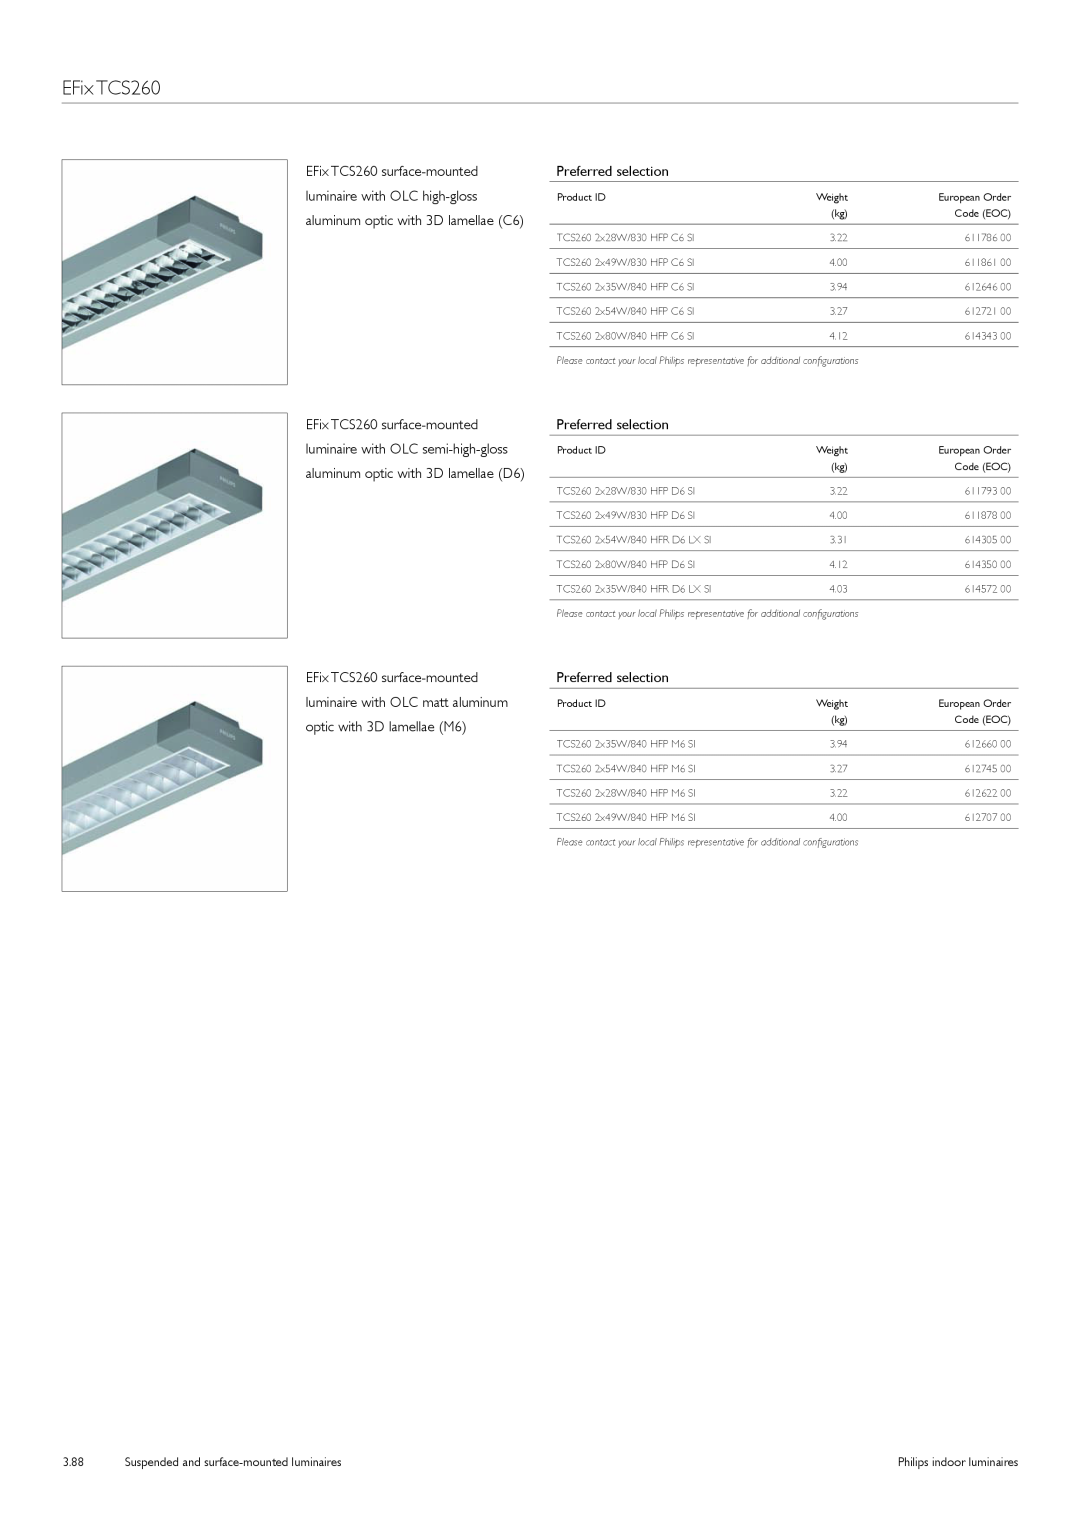 Philips TCS125 manual EFix TCS260, Suspended and surface-mountedluminaires 